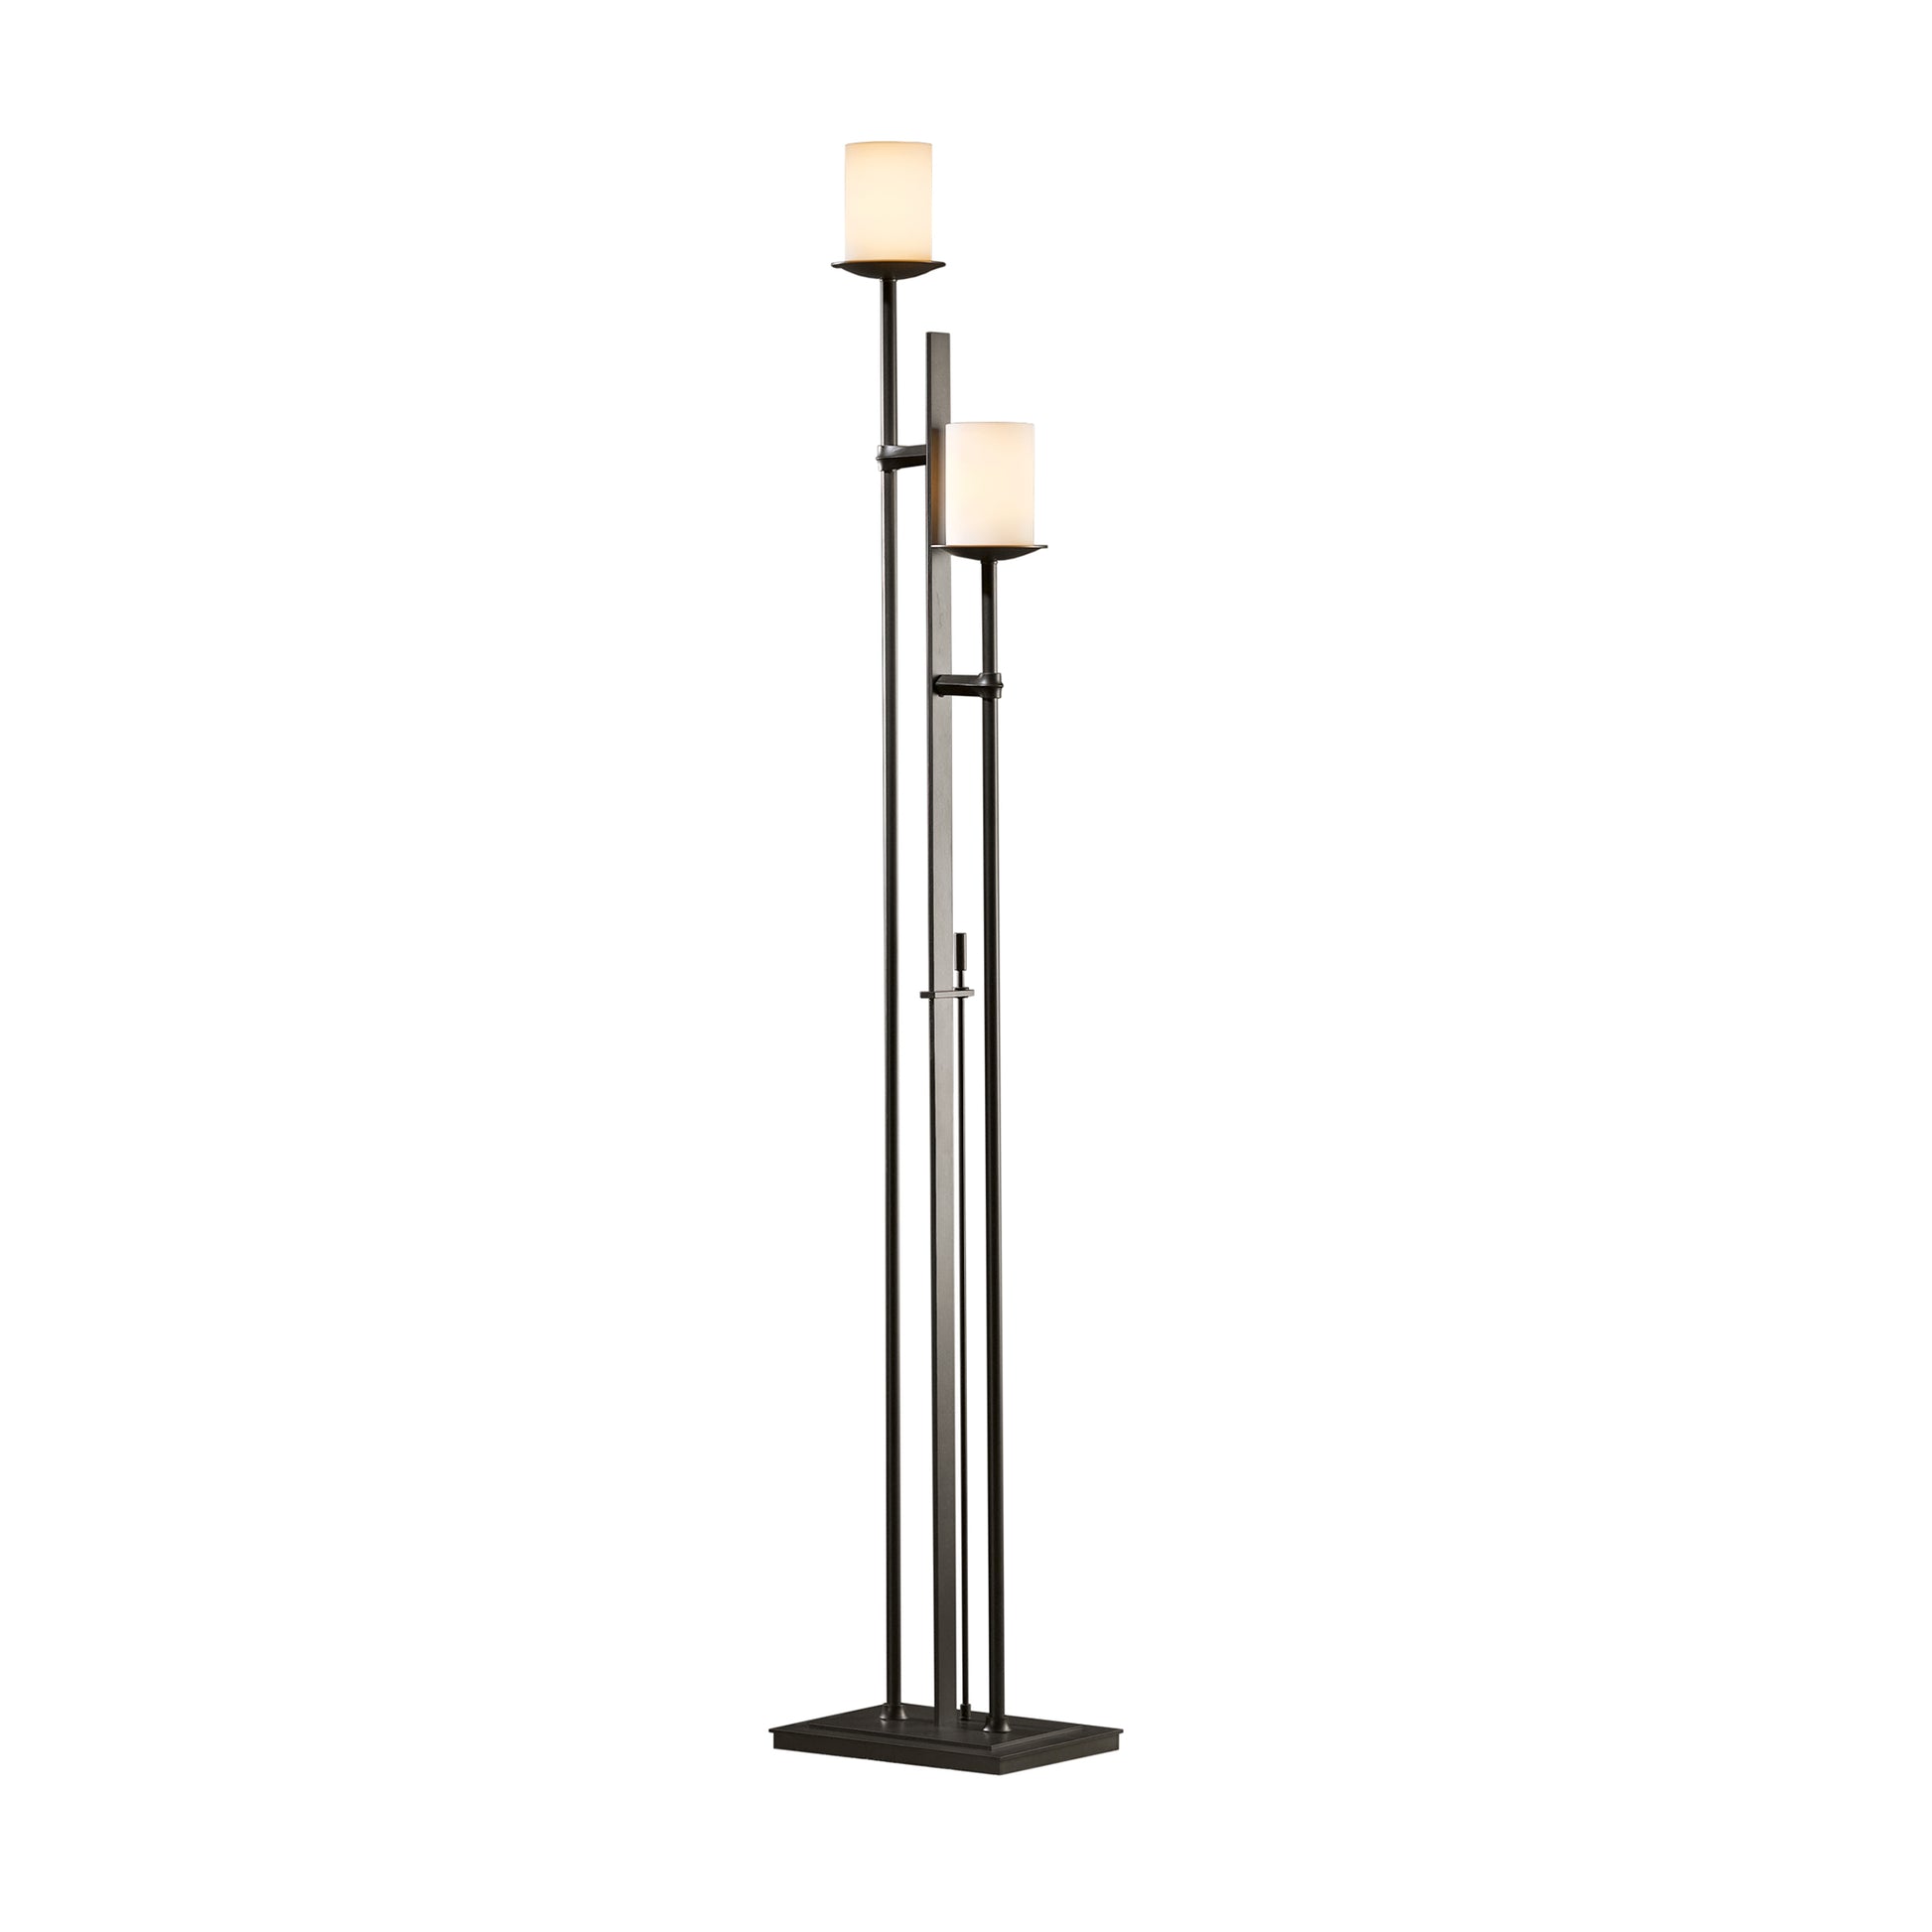 The Hubbardton Forge Rook Twin Floor Lamp features a sleek black design with a stylish white shade.